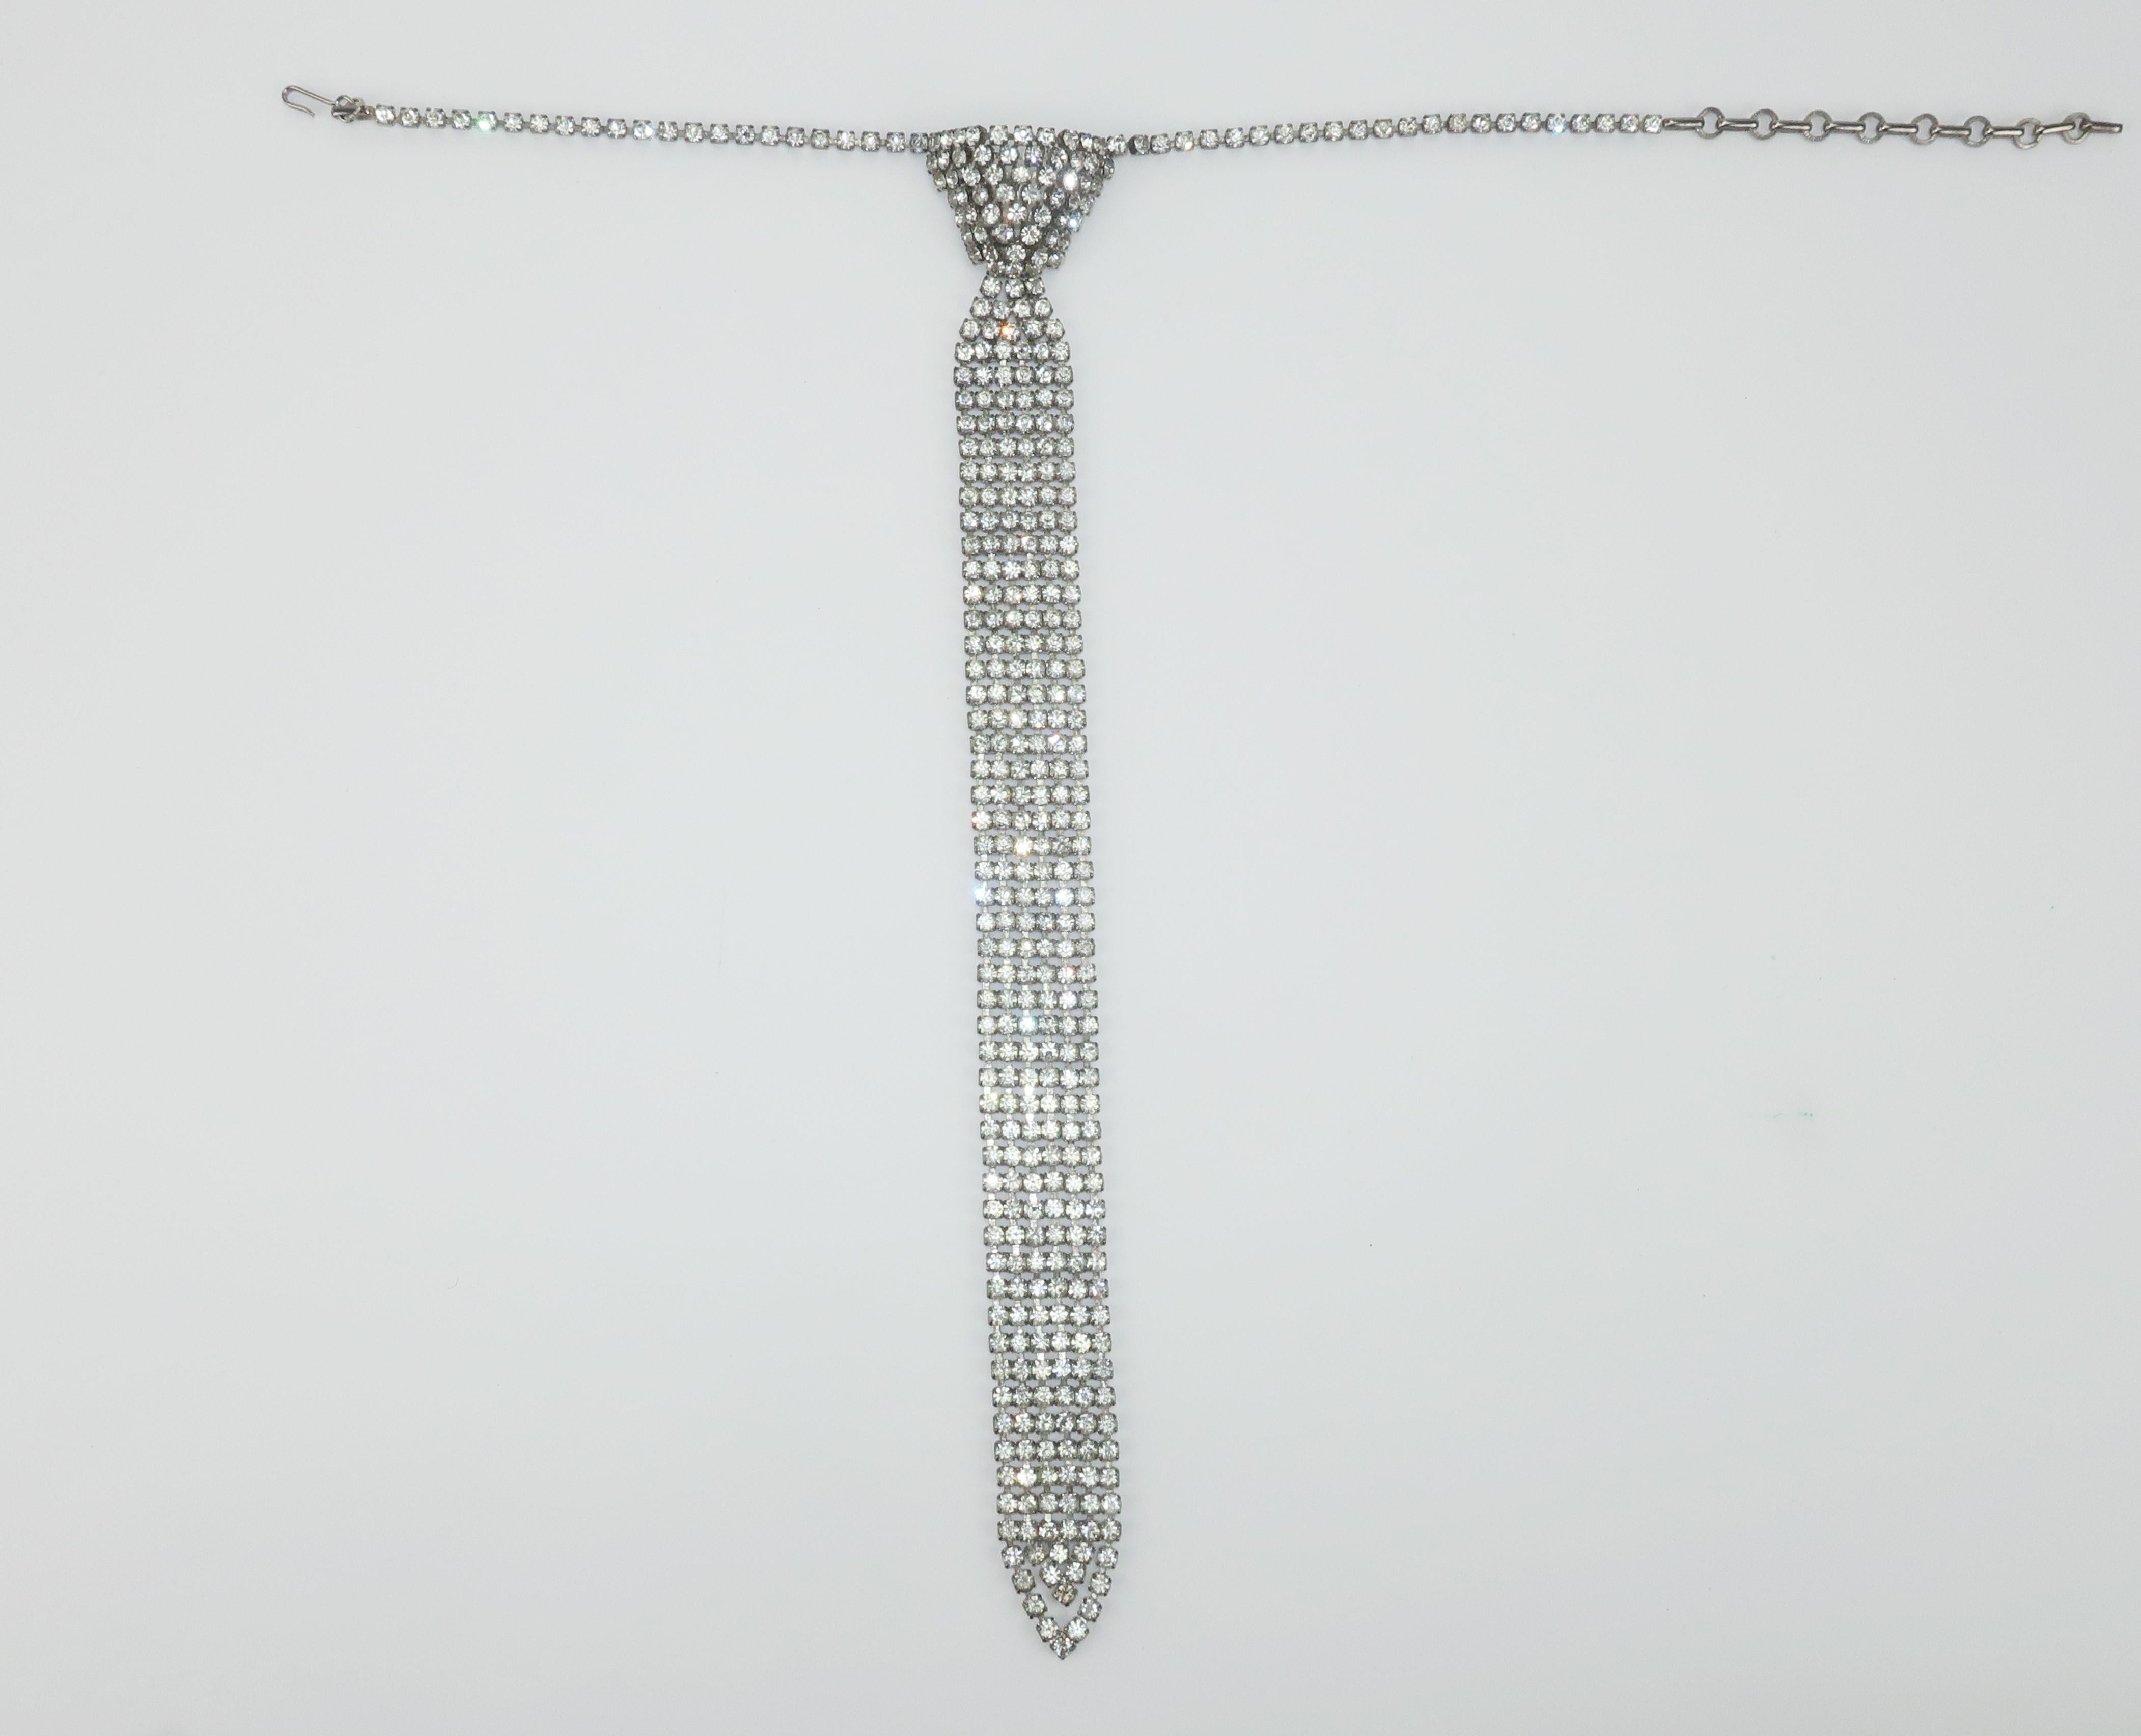 1970's disco glam rhinestone necklace in the whimsical shape of a knotted necktie.  The ultra sparkly stones draw the eye to the neck line and can serve to accent a collared shirt or a plunging décolleté.  The adjustable hook and chain allows for a